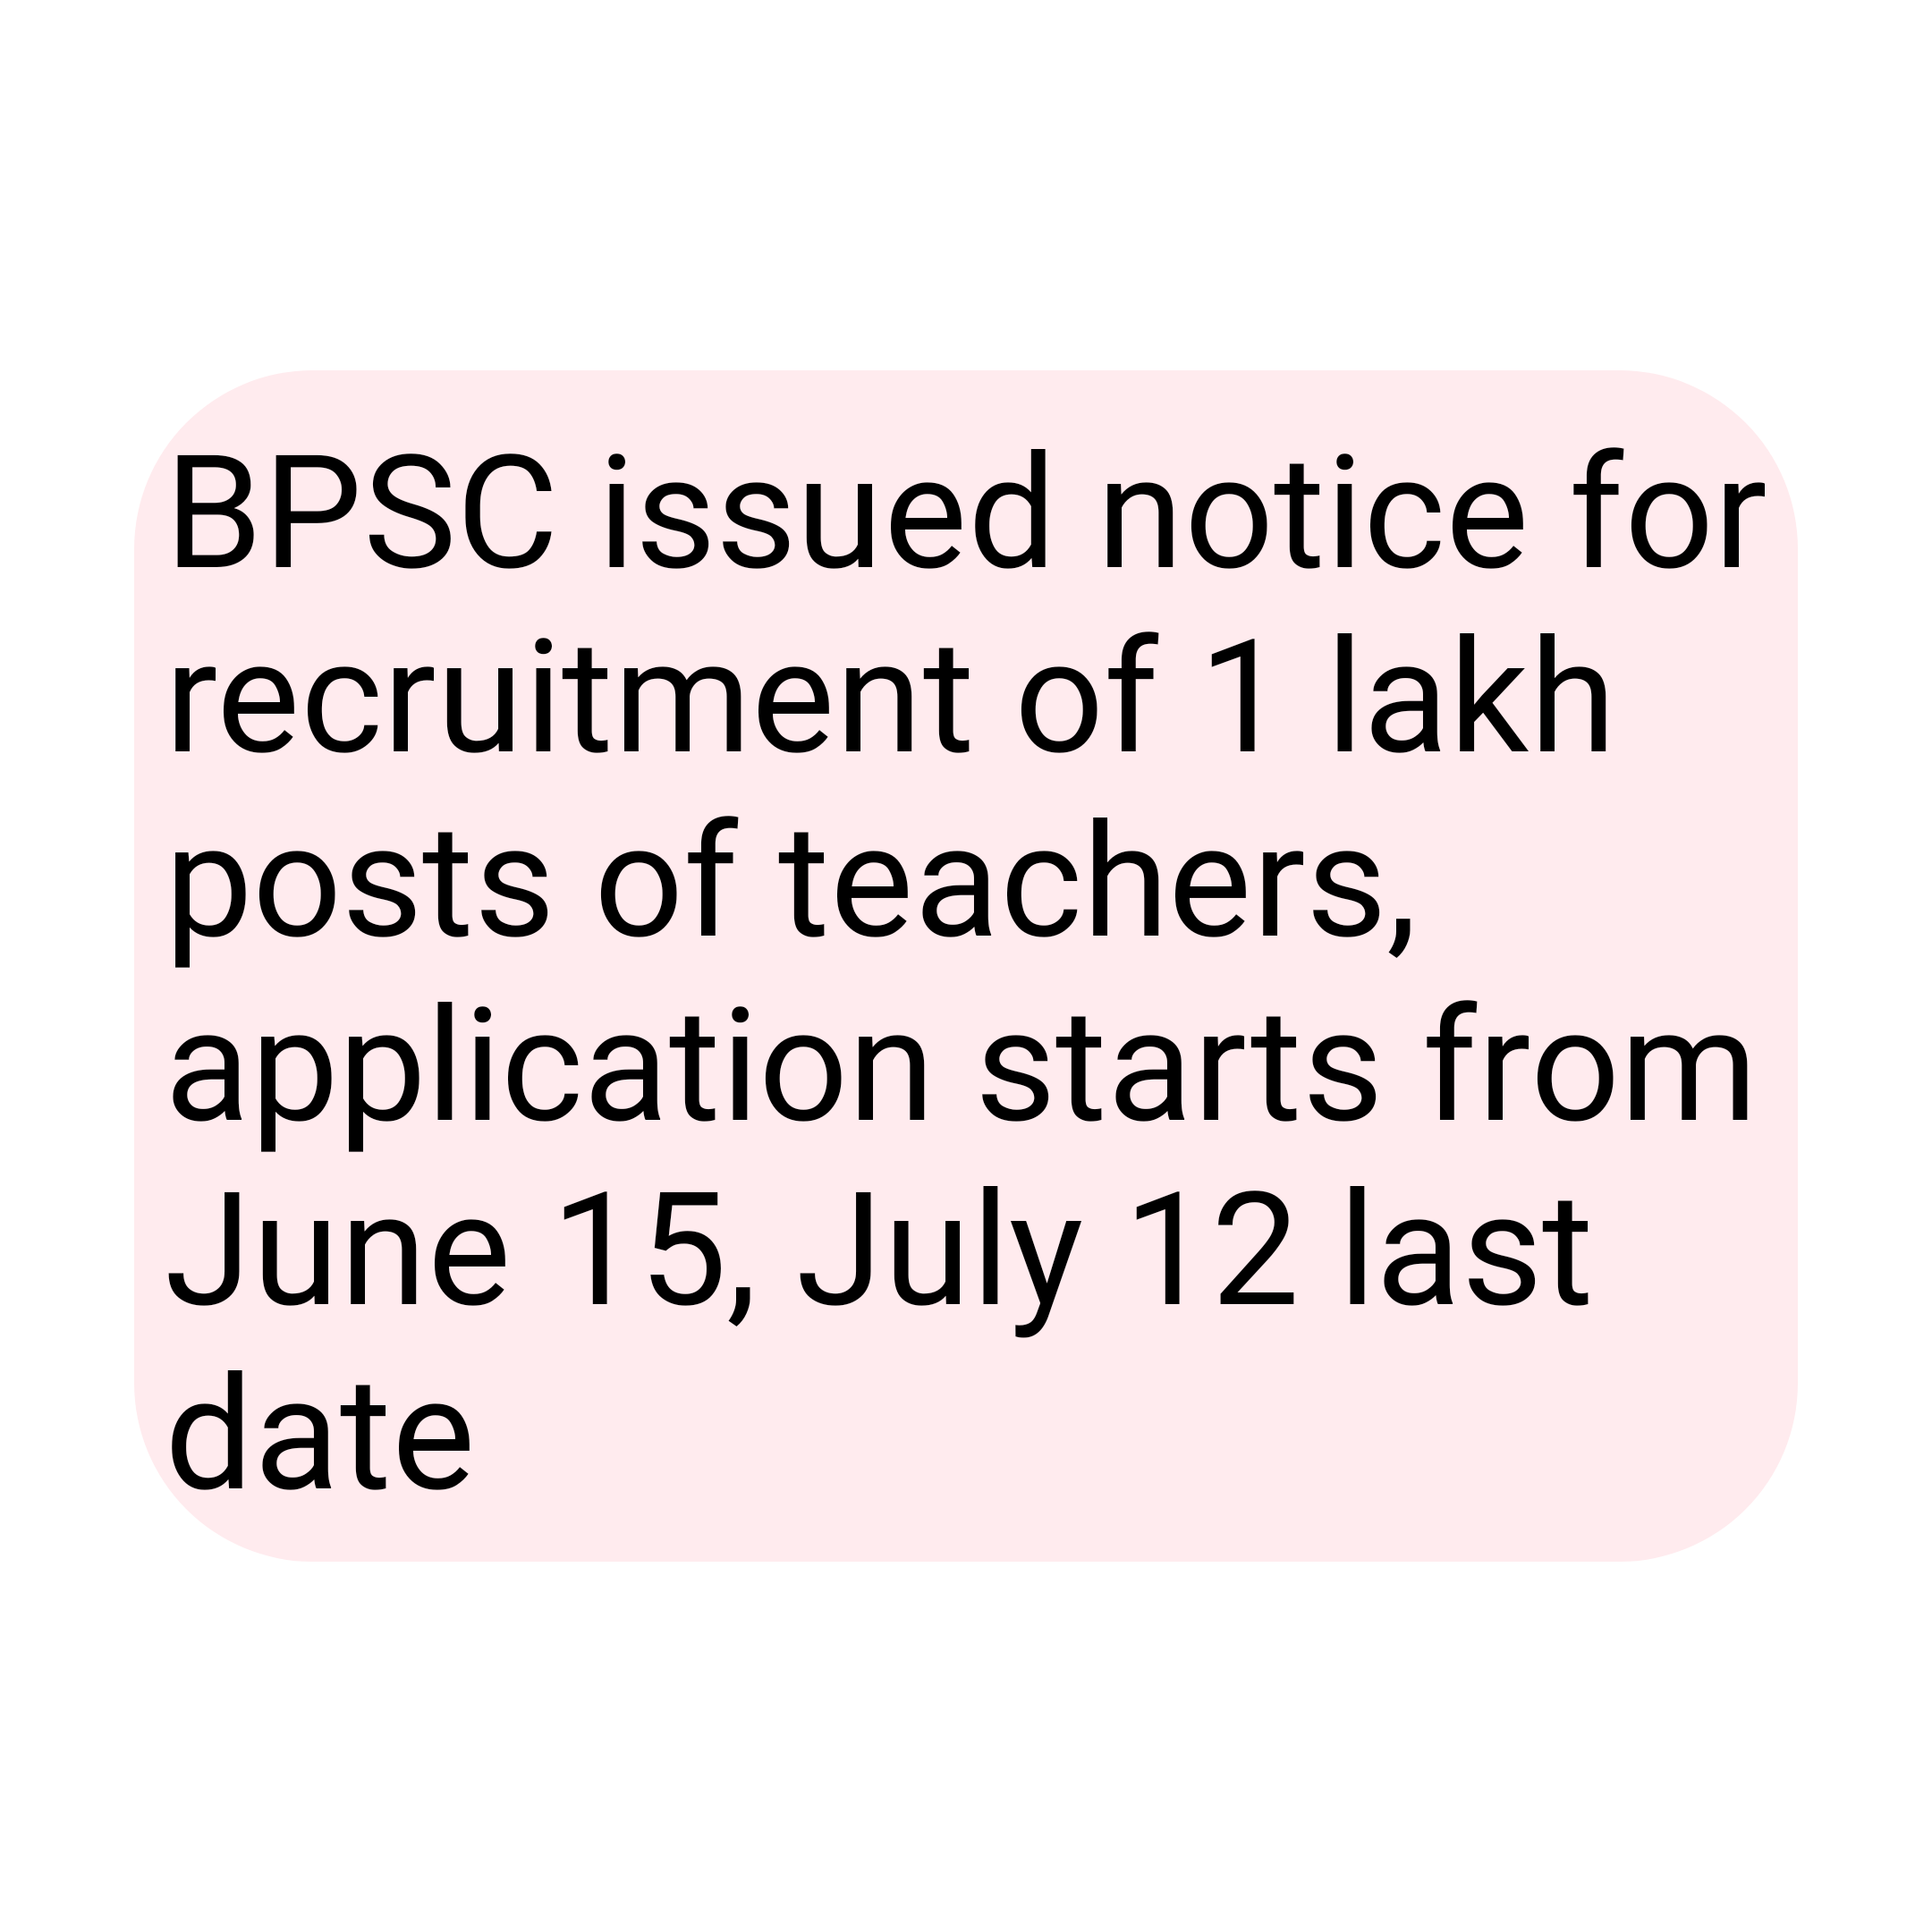 BPSC issued notice for recruitment